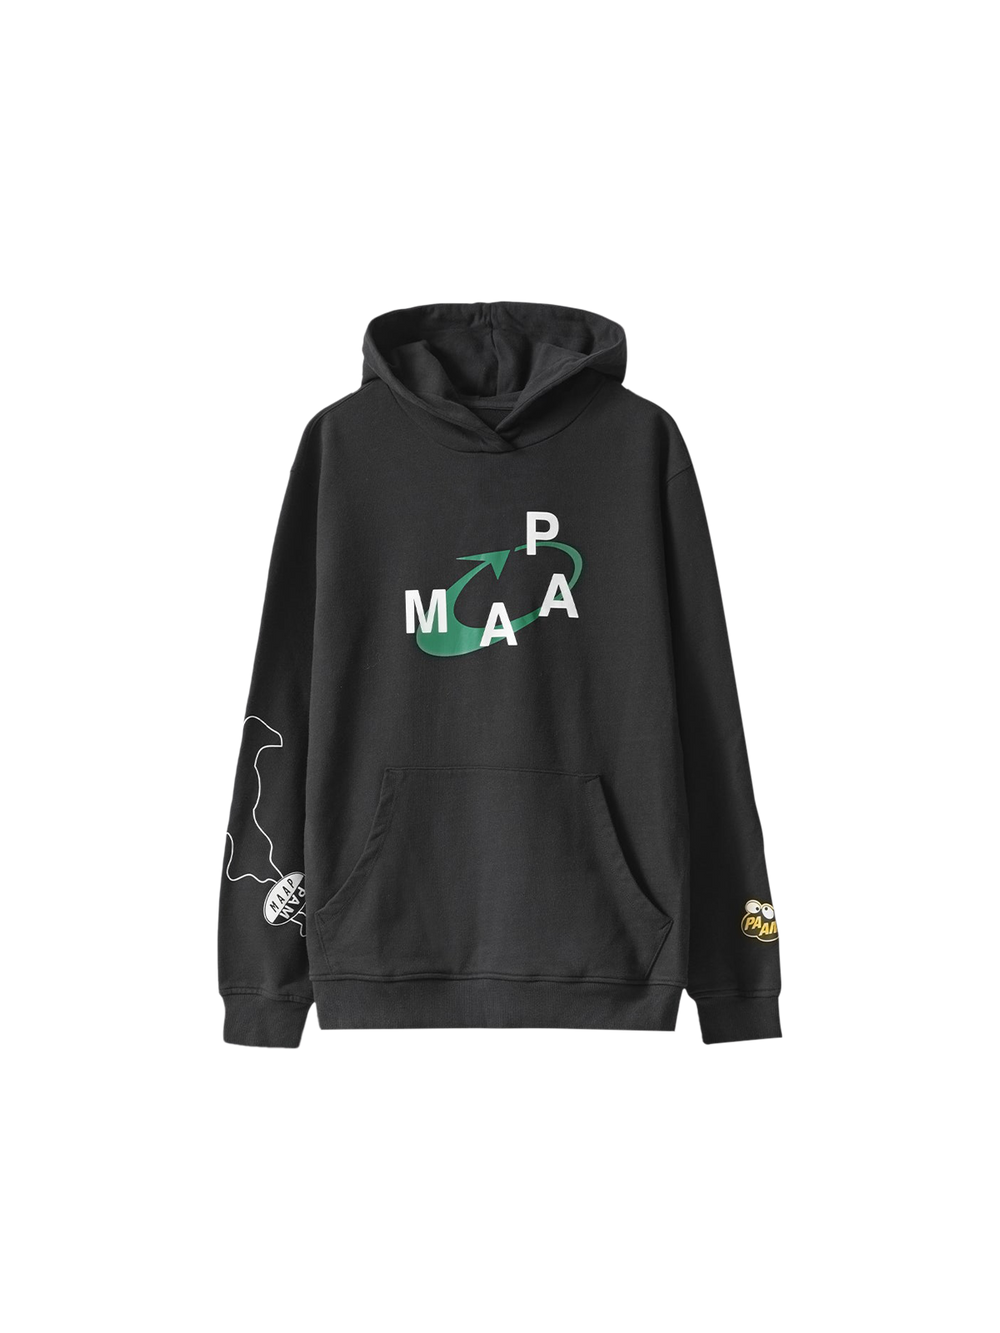 Product Image for MAAP X PAM Print Hoodie